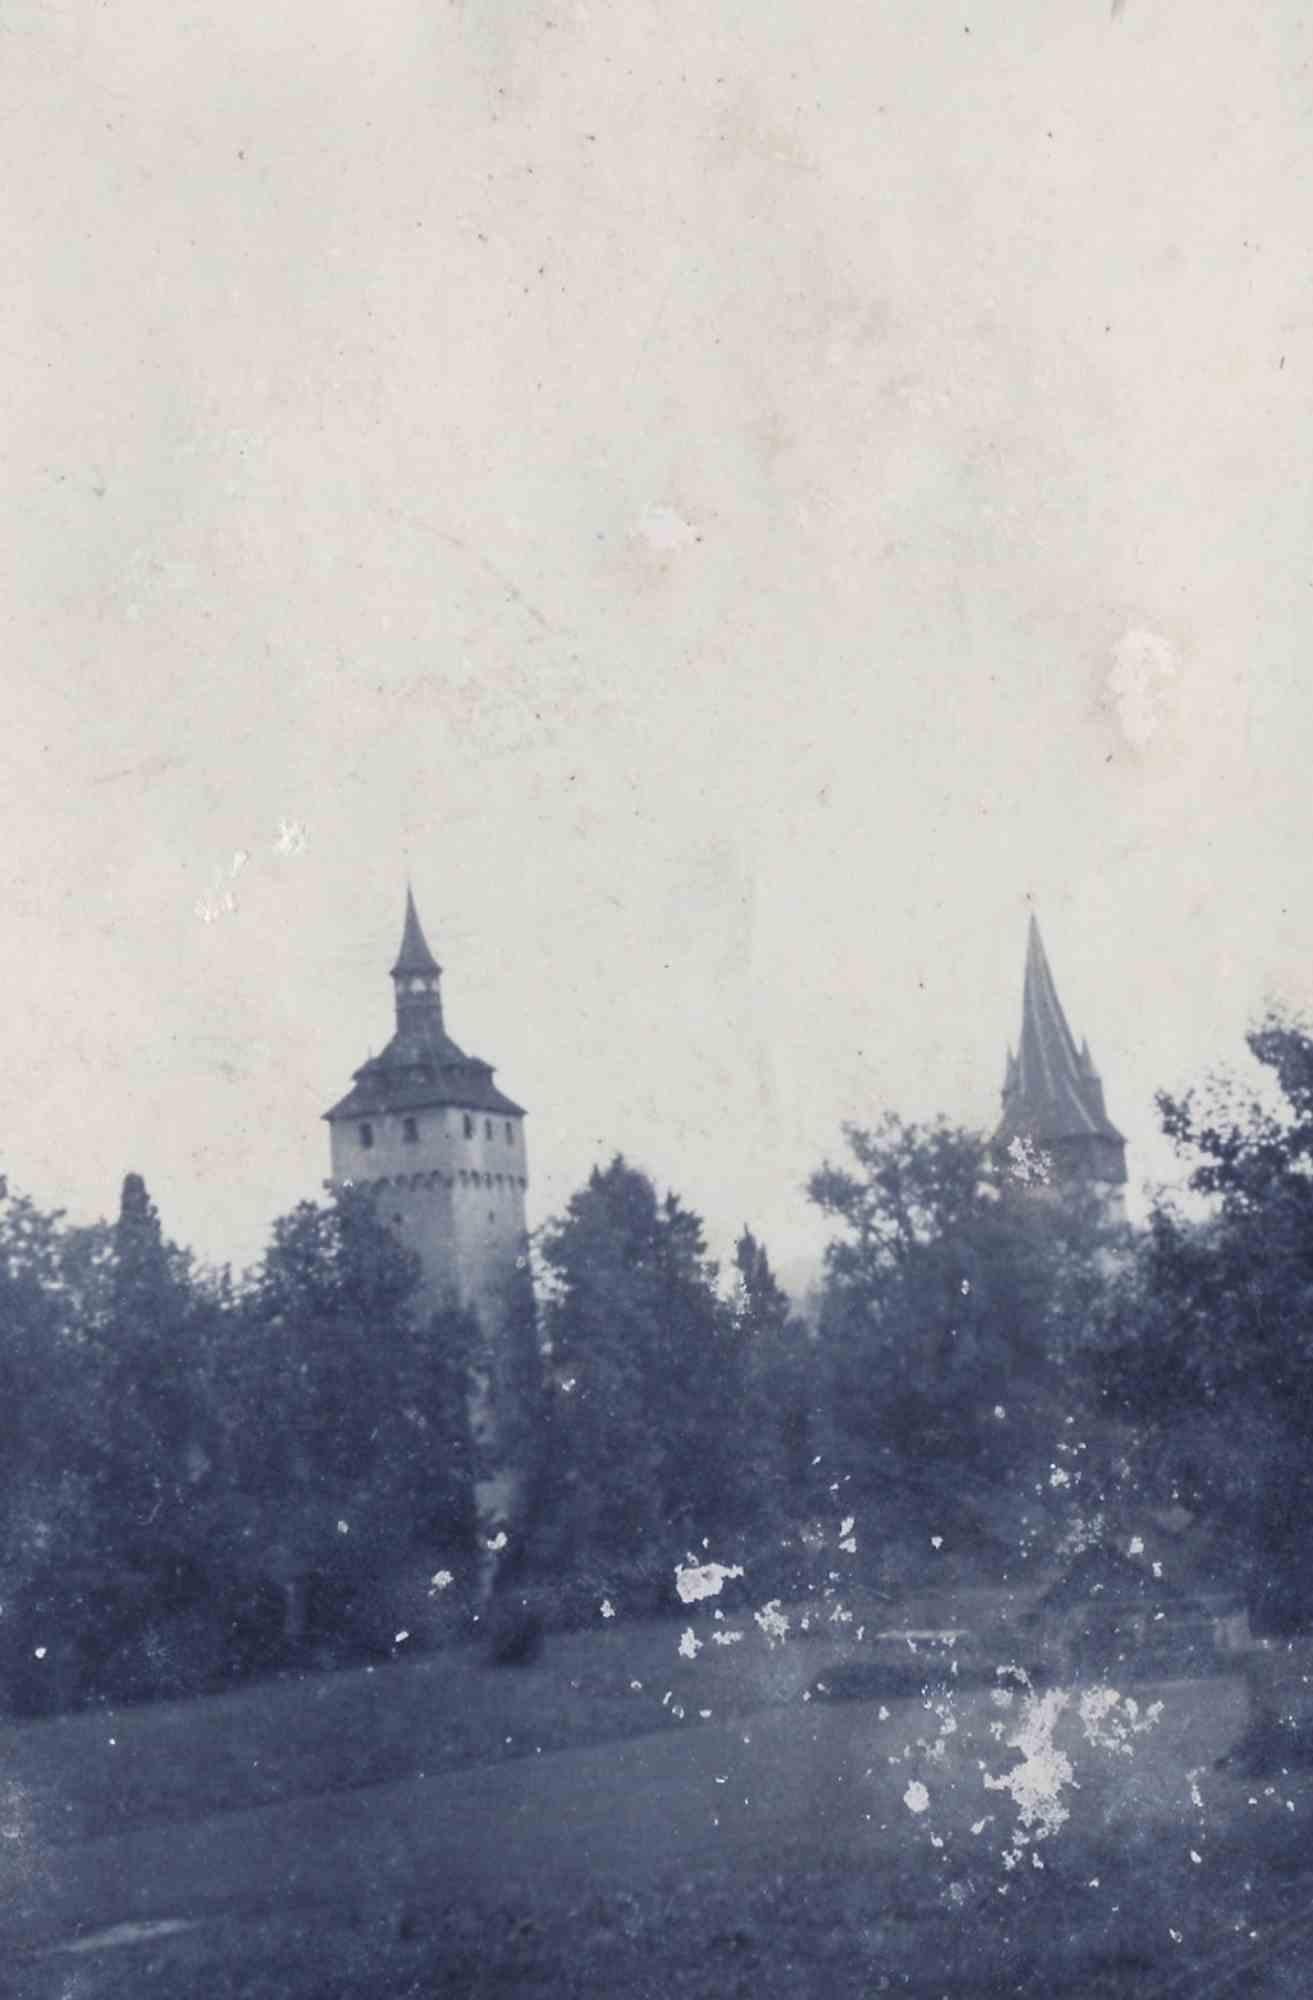 Unknown Landscape Photograph - Old Days Photo - Church - Vintage Photo - Mid-20th Century